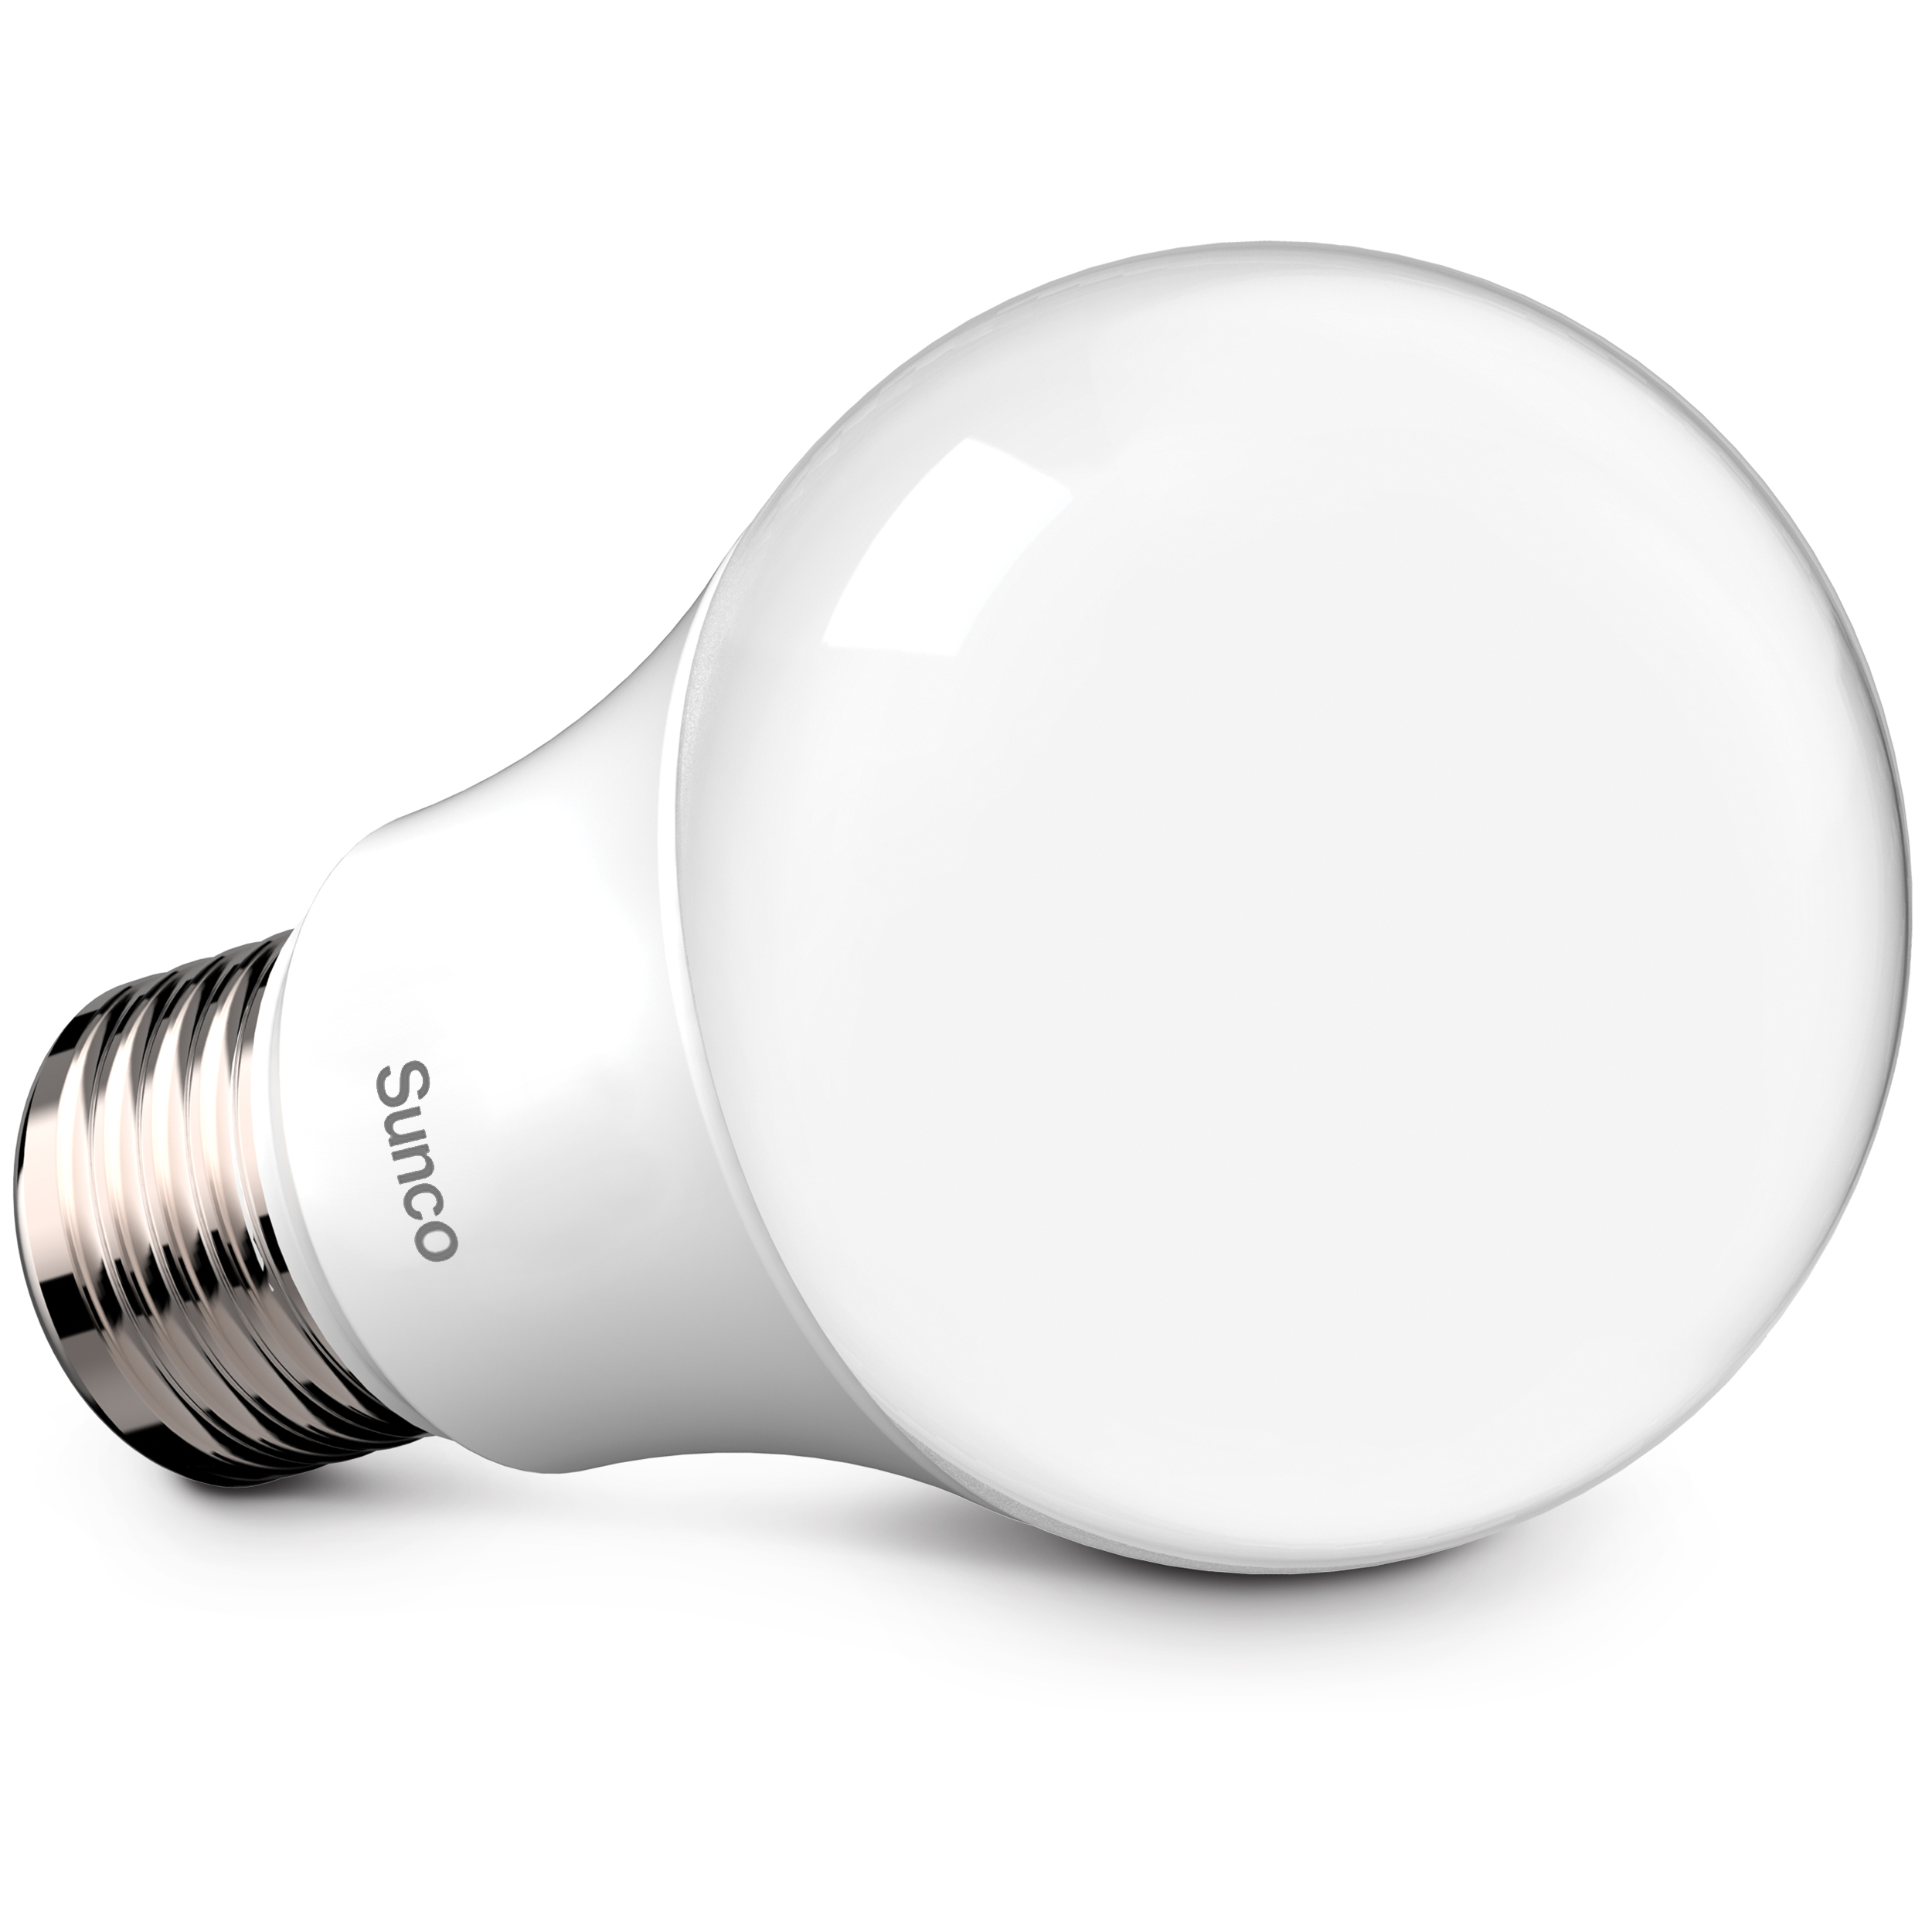 When you reduce your power consumption by using low watt LED light bulbs instead of high watt incandescent bulbs, you can lower your power bill. Sunco’s A19 9W LED Bulb is a 60W equivalent. 9W=60W is a lot of power savings. It can add up when you have multiple table lamps in your living room or desk lamps in an office. This image shows the non-dimmable A19 LED bulb on its size to show off its standard a series light bulb shape.